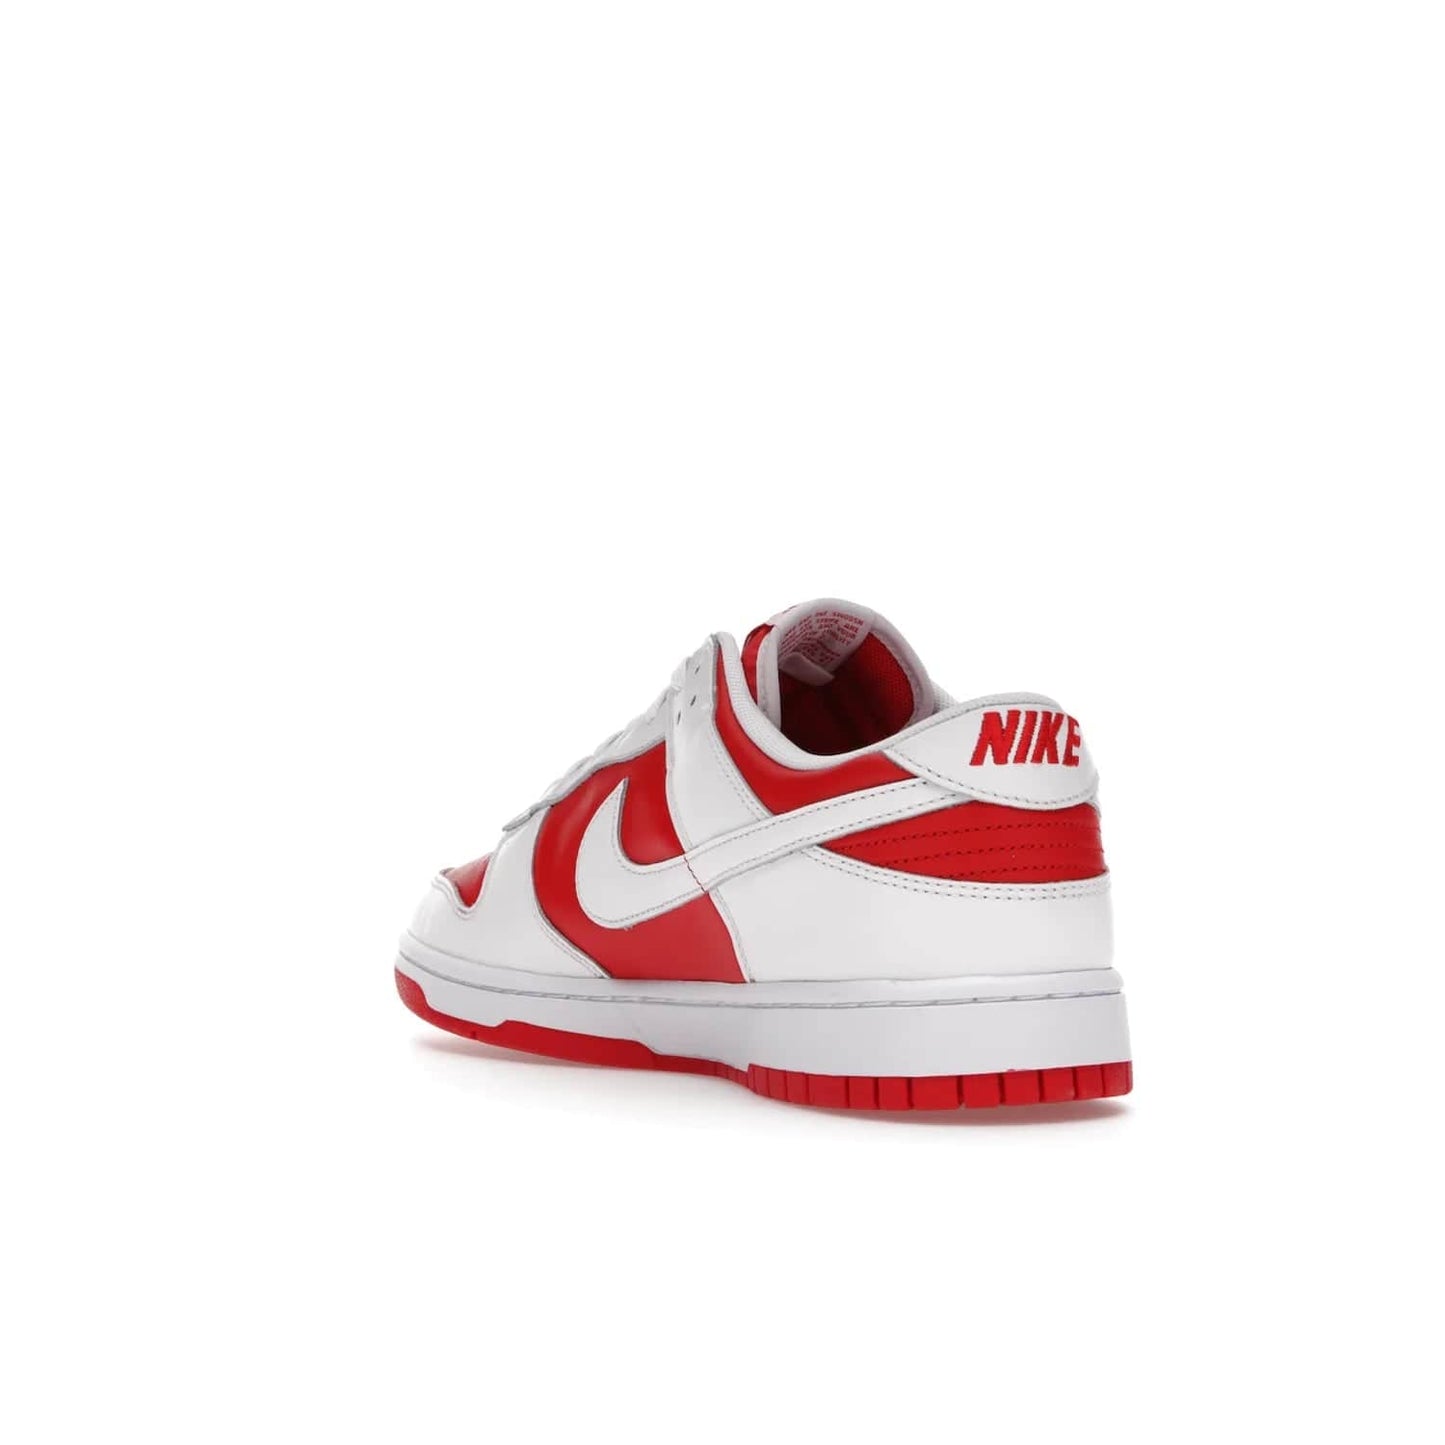 Nike Dunk Low Championship Red (2021) - Image 25 - Only at www.BallersClubKickz.com - A bold and stylish Nike Dunk Low Championship Red from 2021 with a classic retro design. University Red upper, white leather overlays and Swooshes, and a woven tongue label. Make a statement with these sleek kicks!